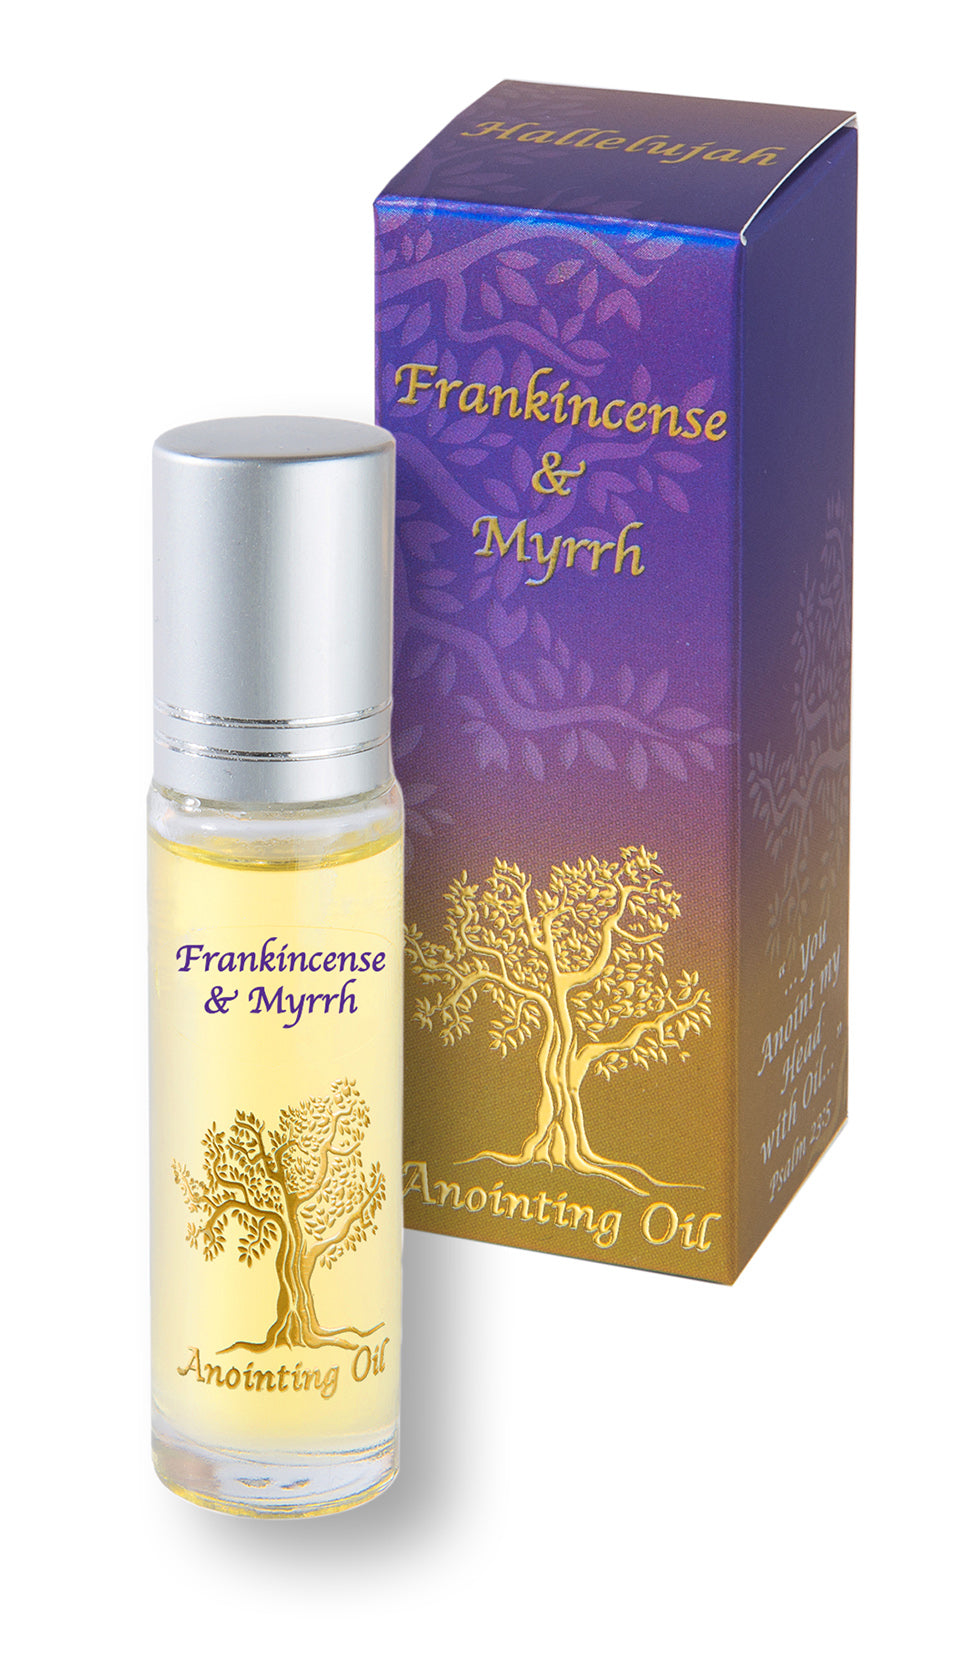 Anointing Oil - Frankincense & Myrrh – Holy Land Gifts